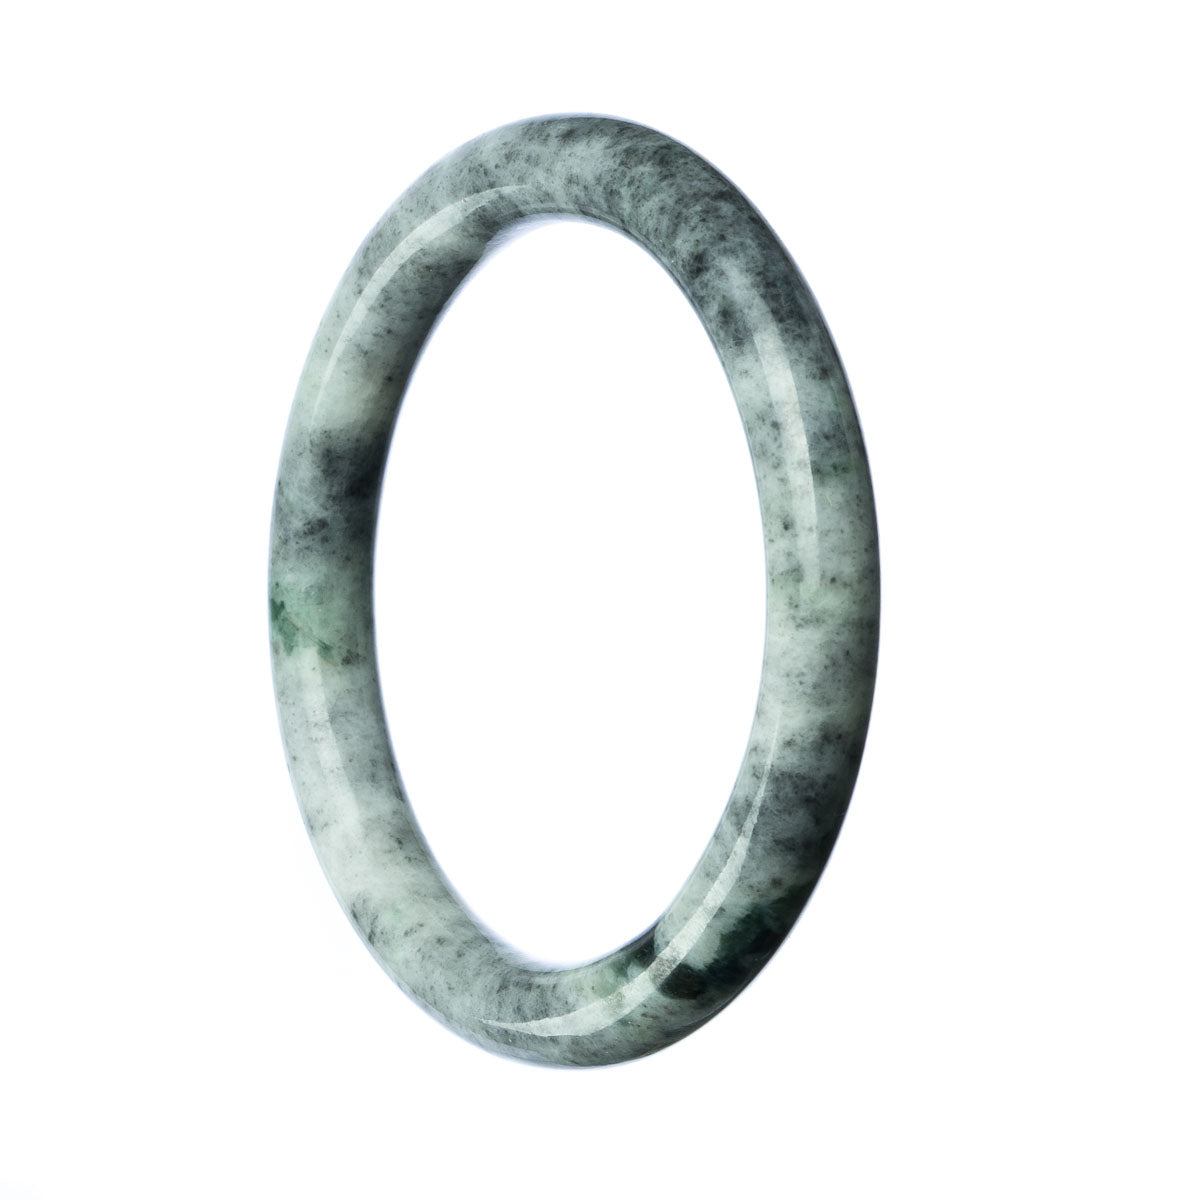 A circular bracelet made of authentic Type A Grey Green Burmese Jade, measuring 58mm in diameter. Crafted by Mays Gems.